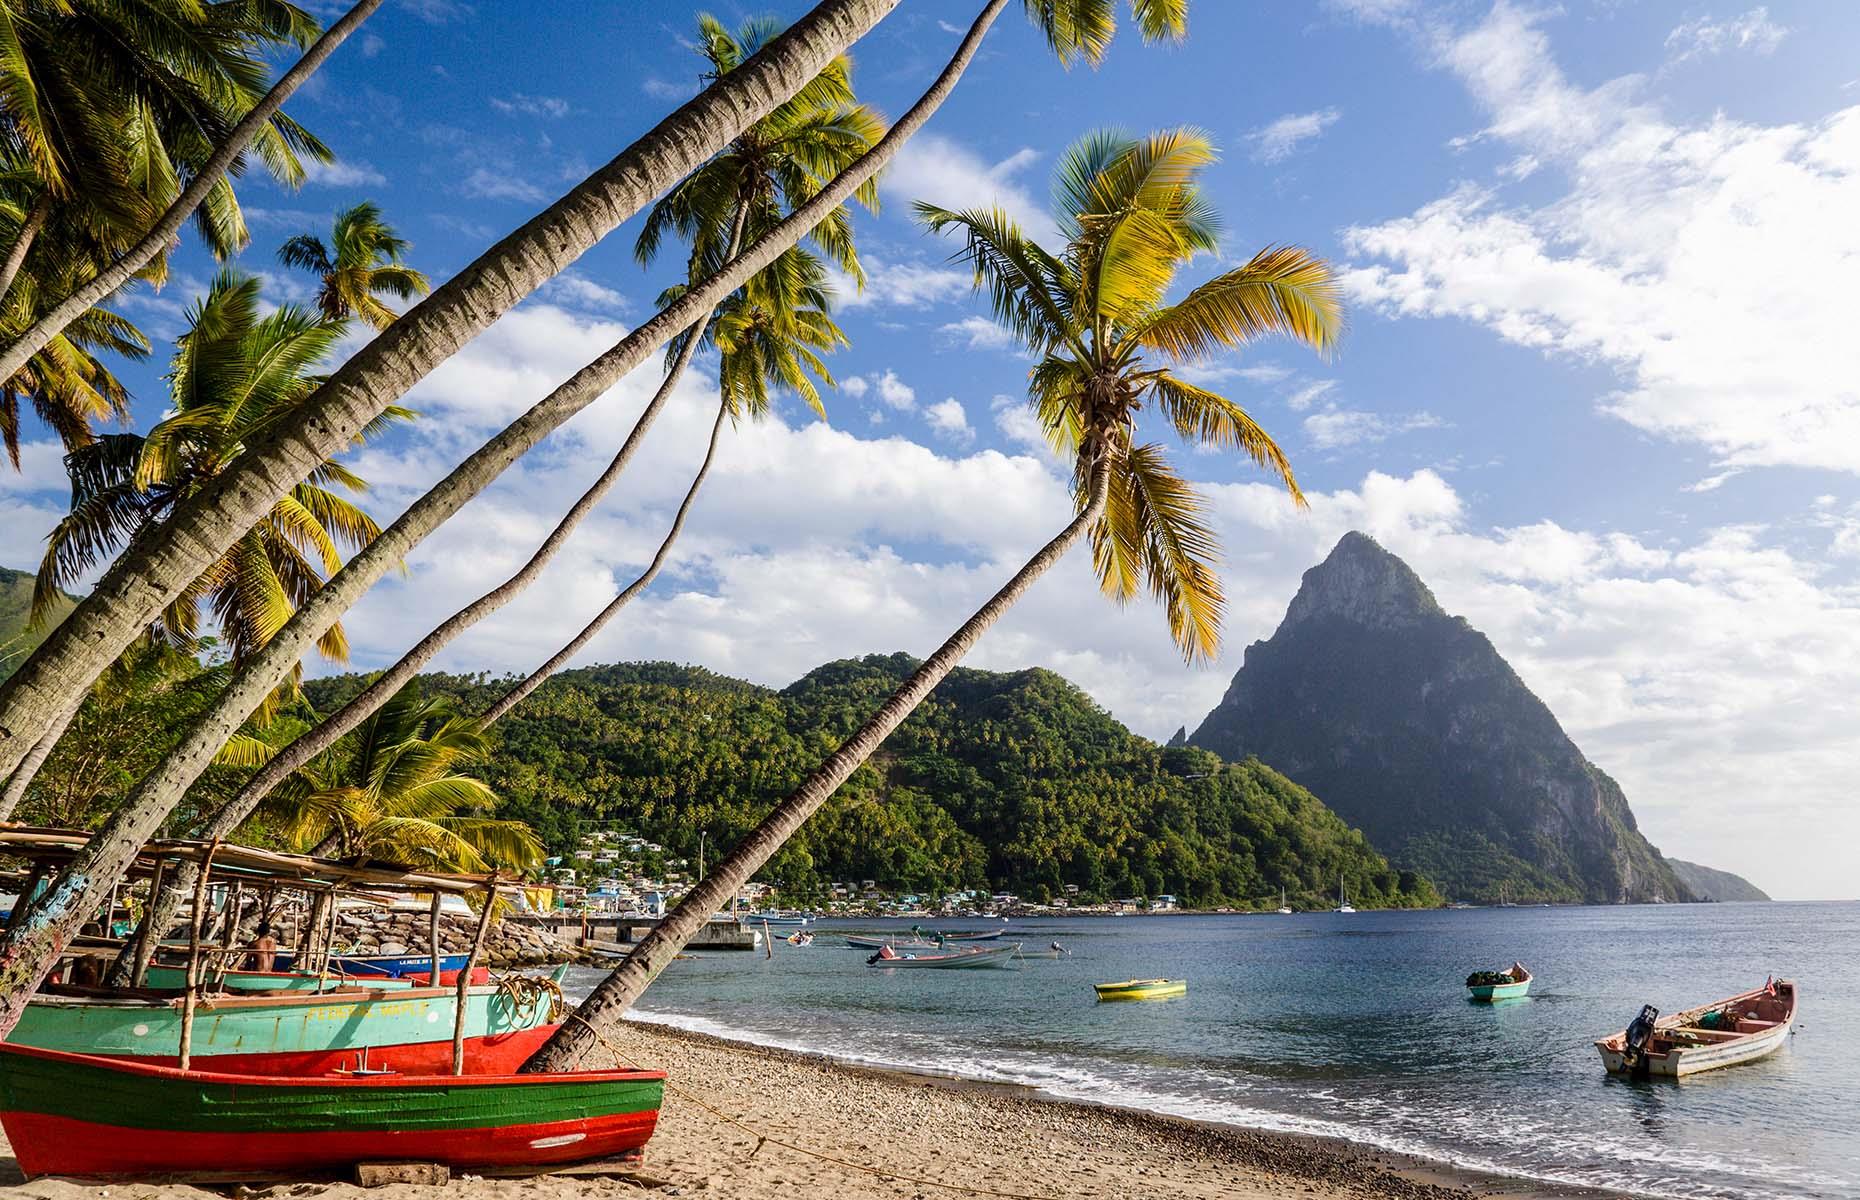 <p>Tucked away in the southwest corner of the island, <a href="http://www.loveexploring.com/news/90604/saint-st-lucia-holidays-caribbean-serenity-coconut-bay">St Lucia’s</a> UNESCO World Heritage-listed Pitons rise sharply from the Caribbean Sea, two triangular volcanic plugs clad in thick vegetation. Gros Piton is slightly taller at 2,530 feet (771m), with Petit Piton just behind at 2,438 feet (743m). Together they form a perfect backdrop for your St Lucian adventure – from the beach, a sailing boat or the pool at hotels such as Stonefield Resort. Alternatively, hike the well-marked trails on Gros Piton to experience their breathtaking beauty up close.</p>